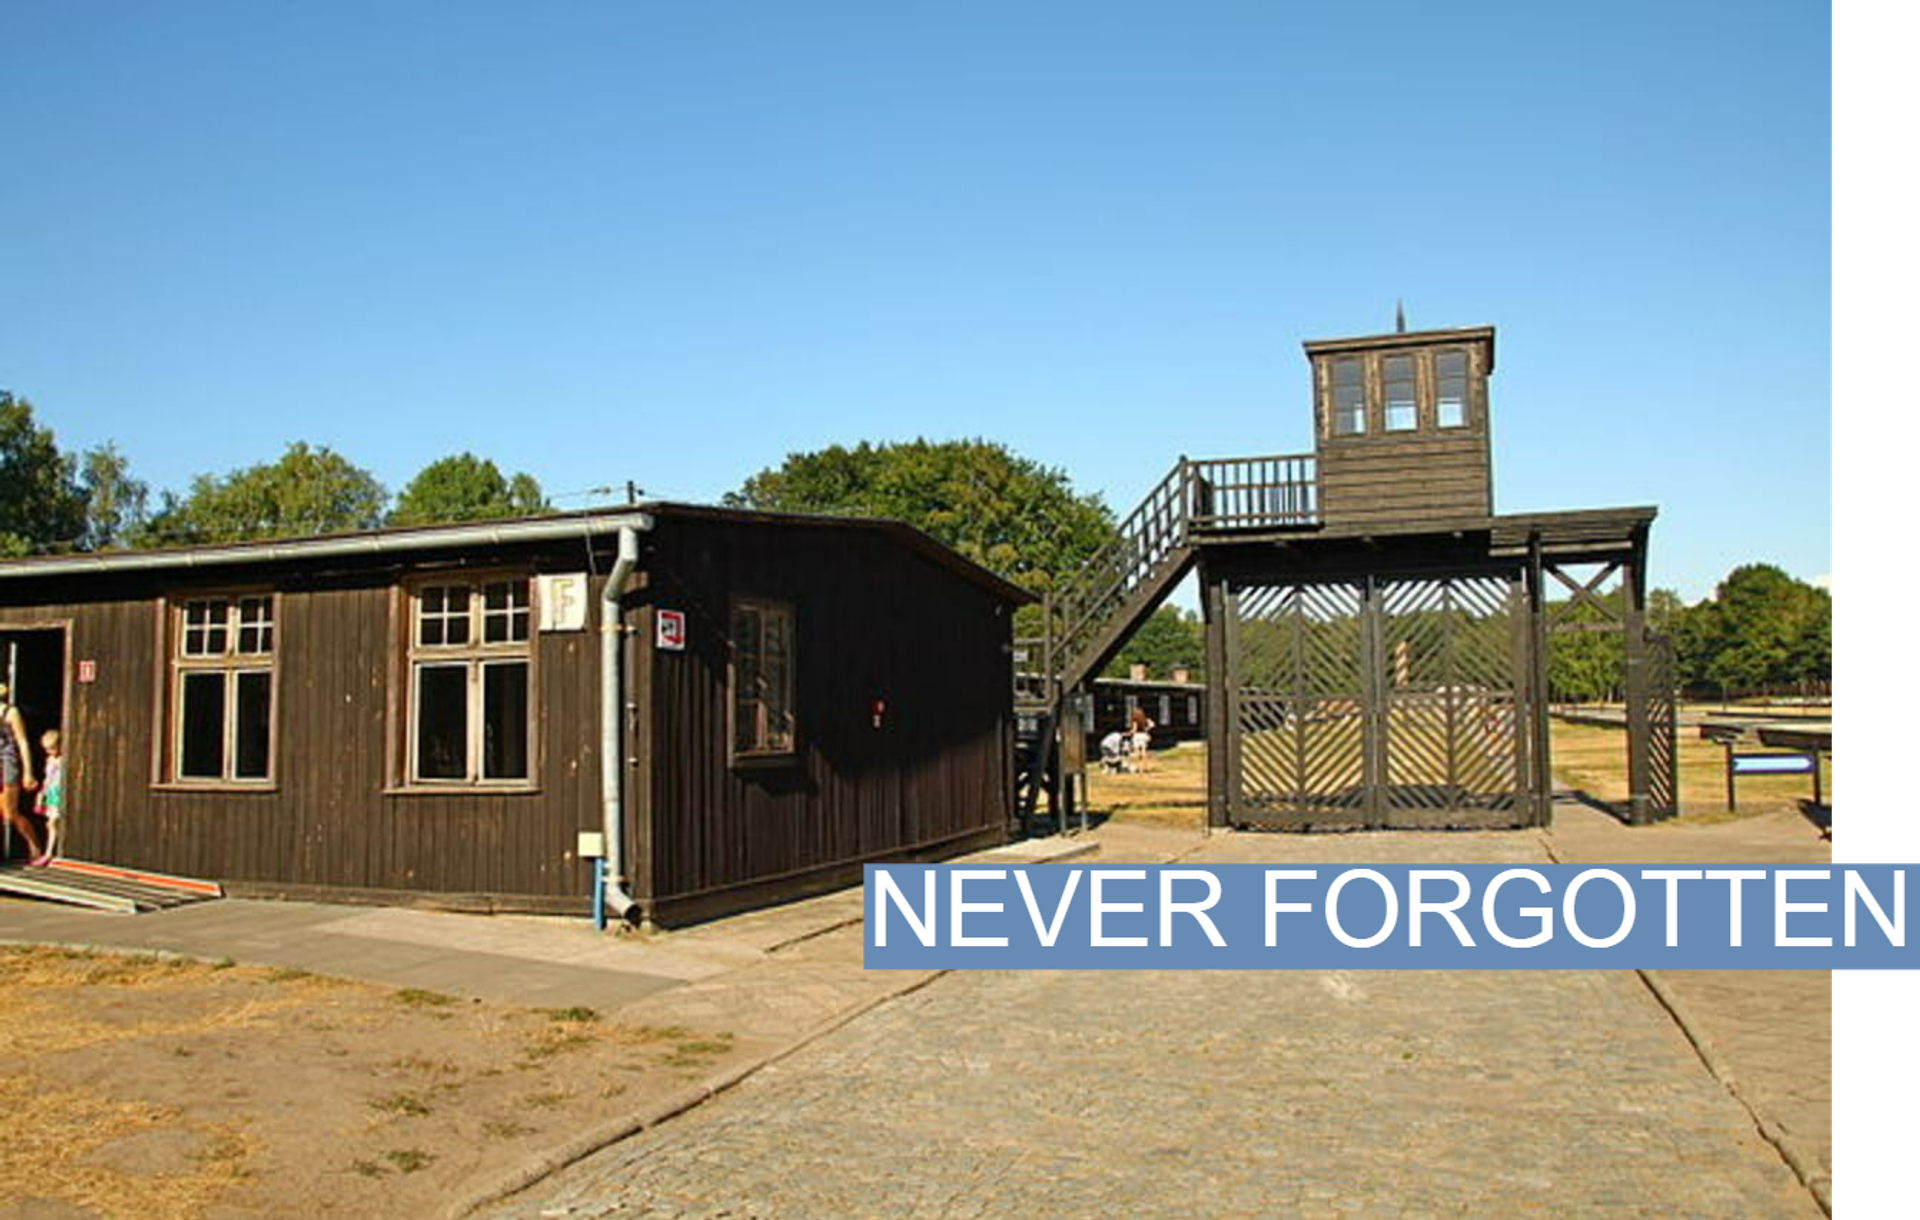 Stutthof memorial and former concentration camp